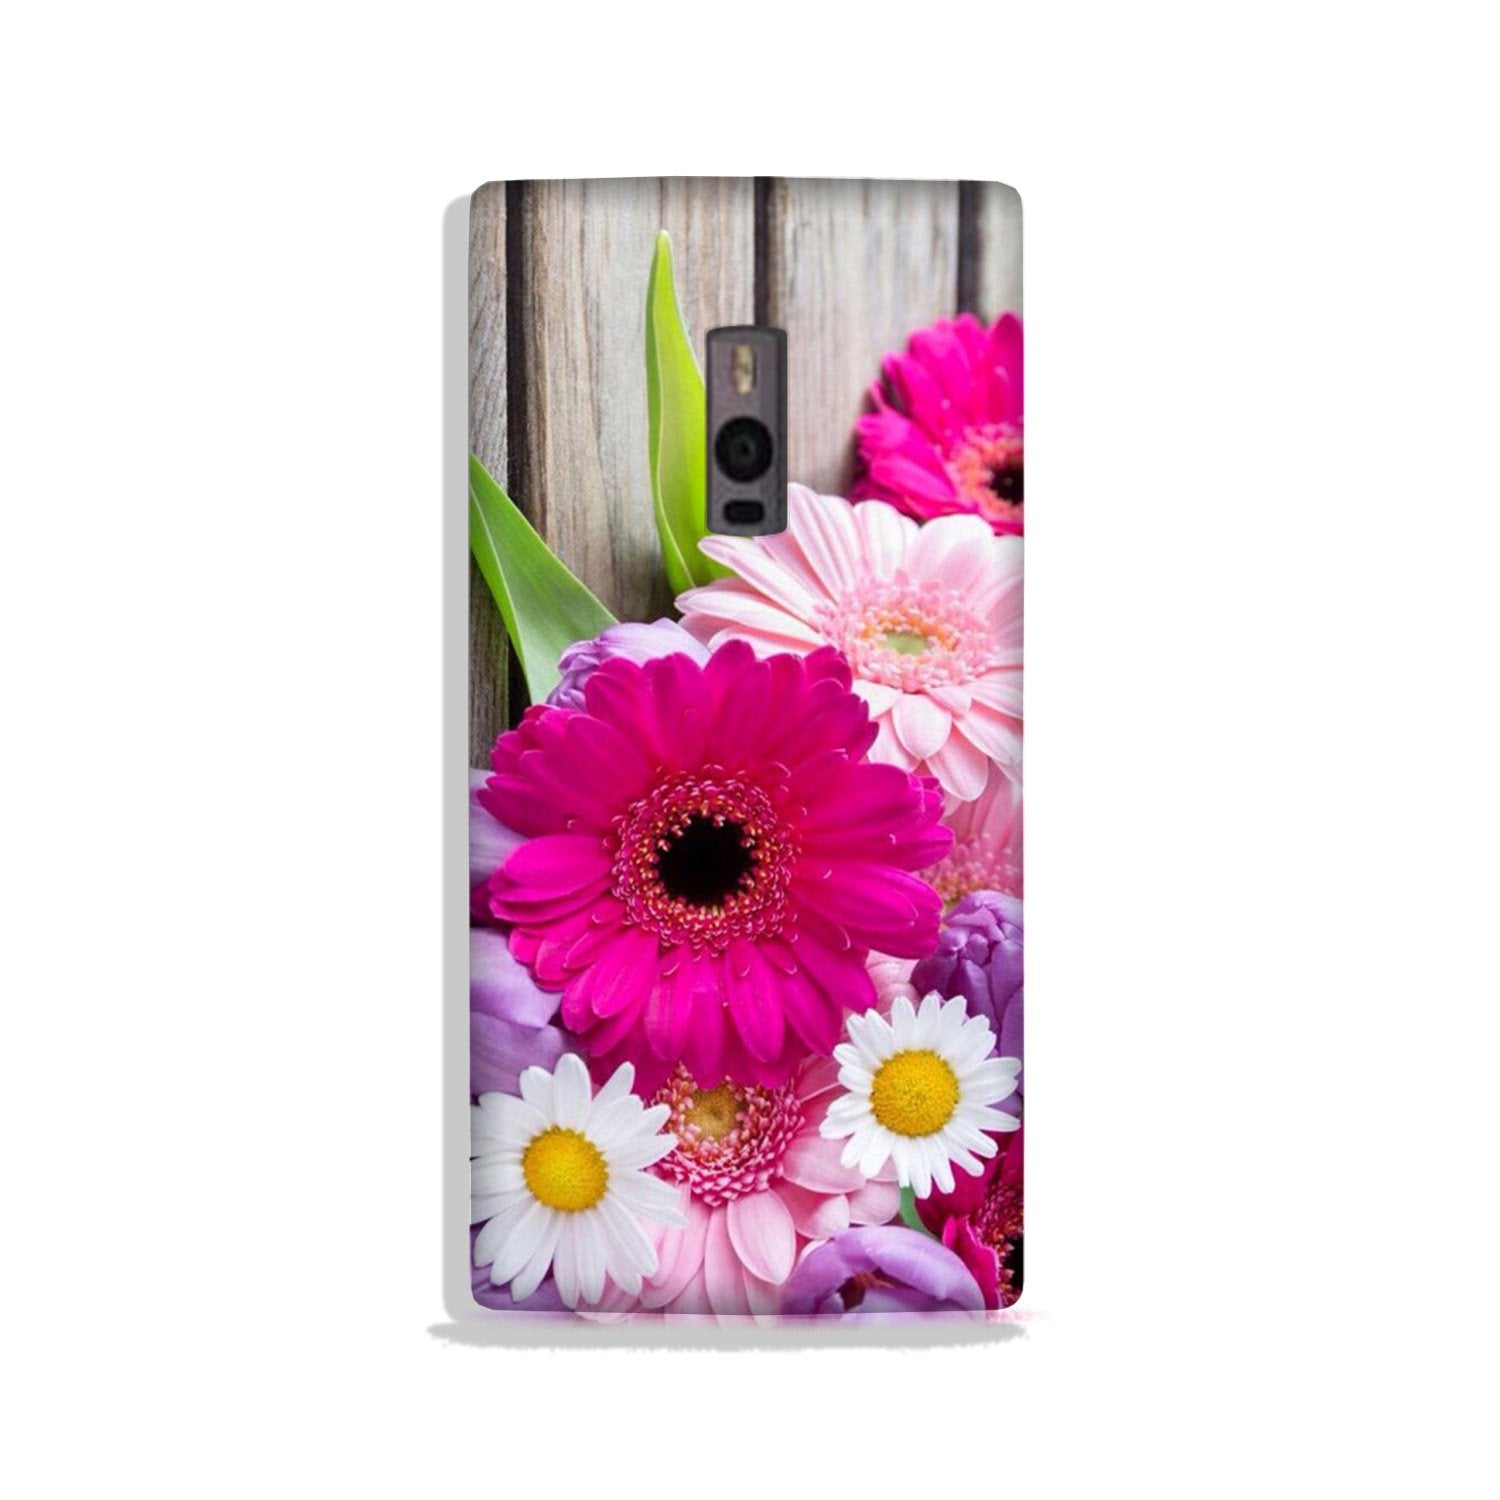 Coloful Daisy2 Case for OnePlus 2